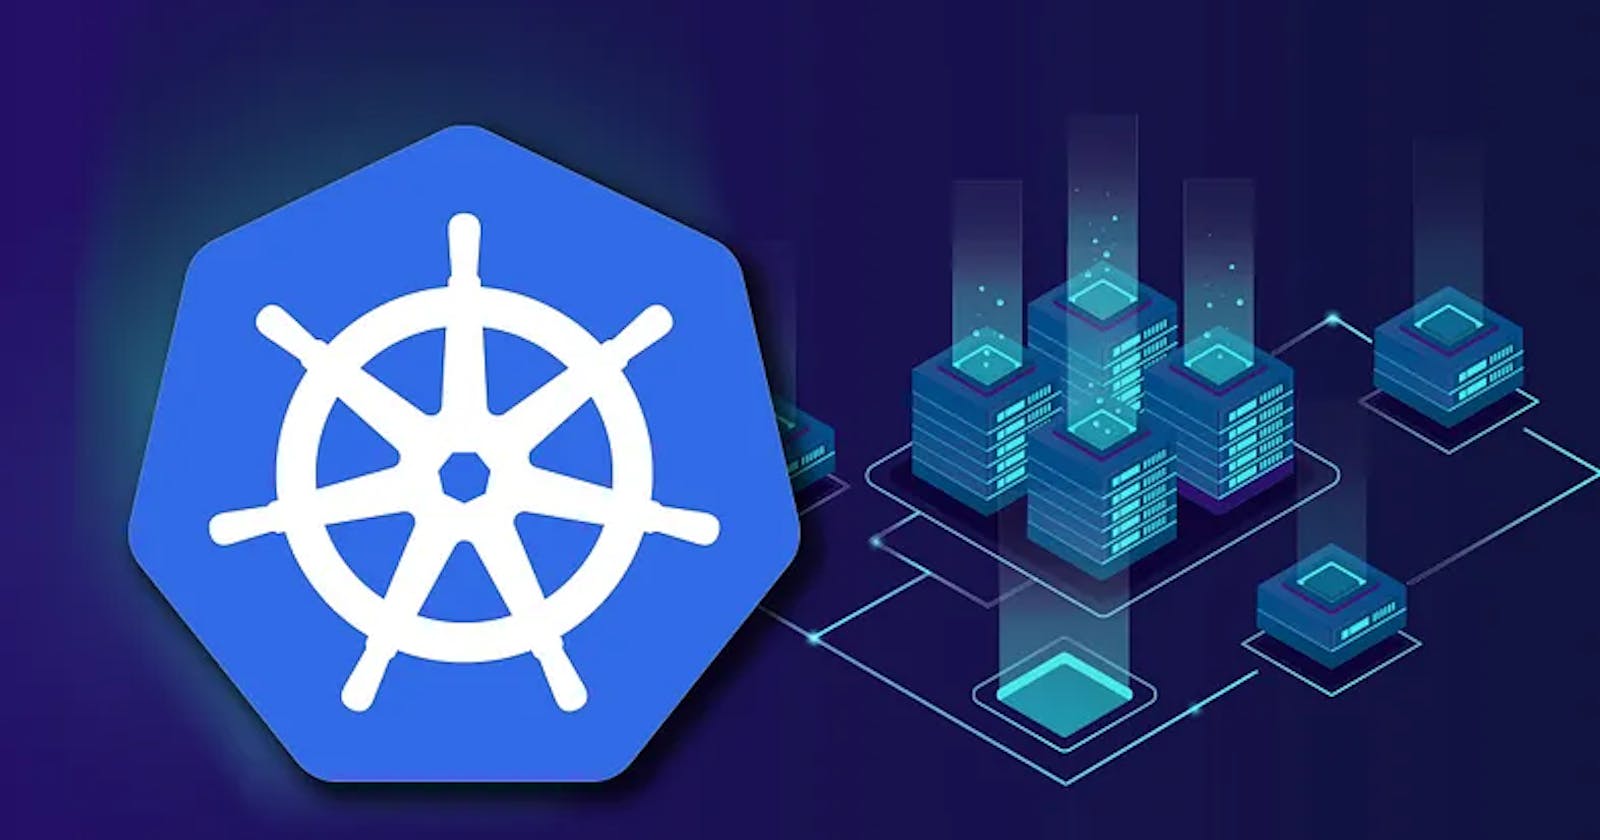 Project-3: Deploying Application in Kubernetes